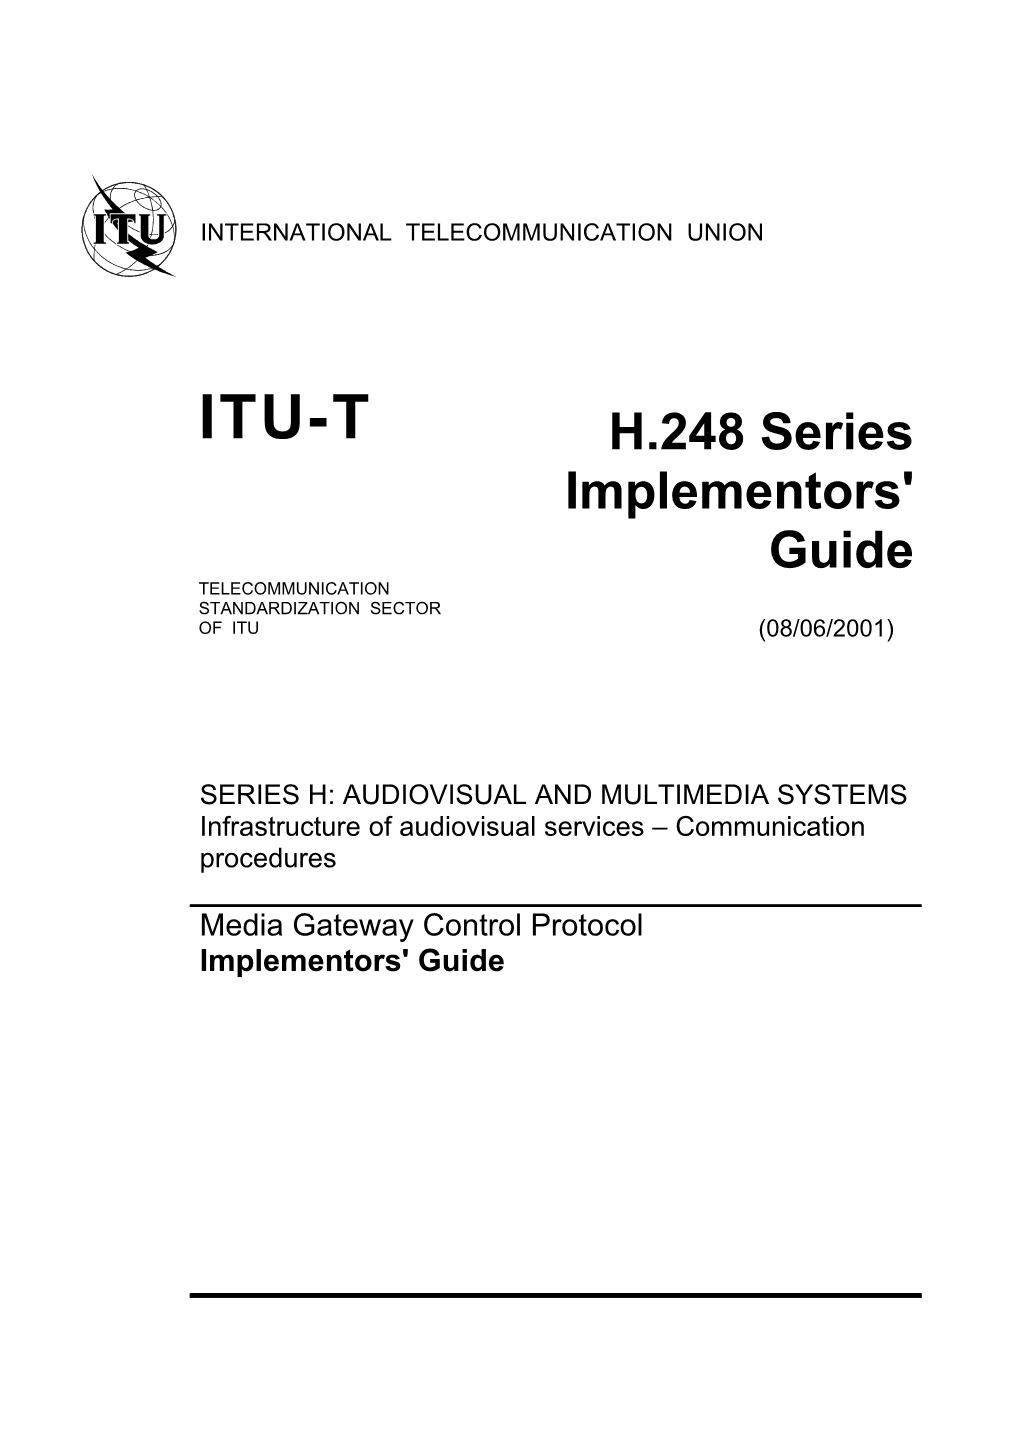 Proposed Additions to the H.248 Implementors' Guide